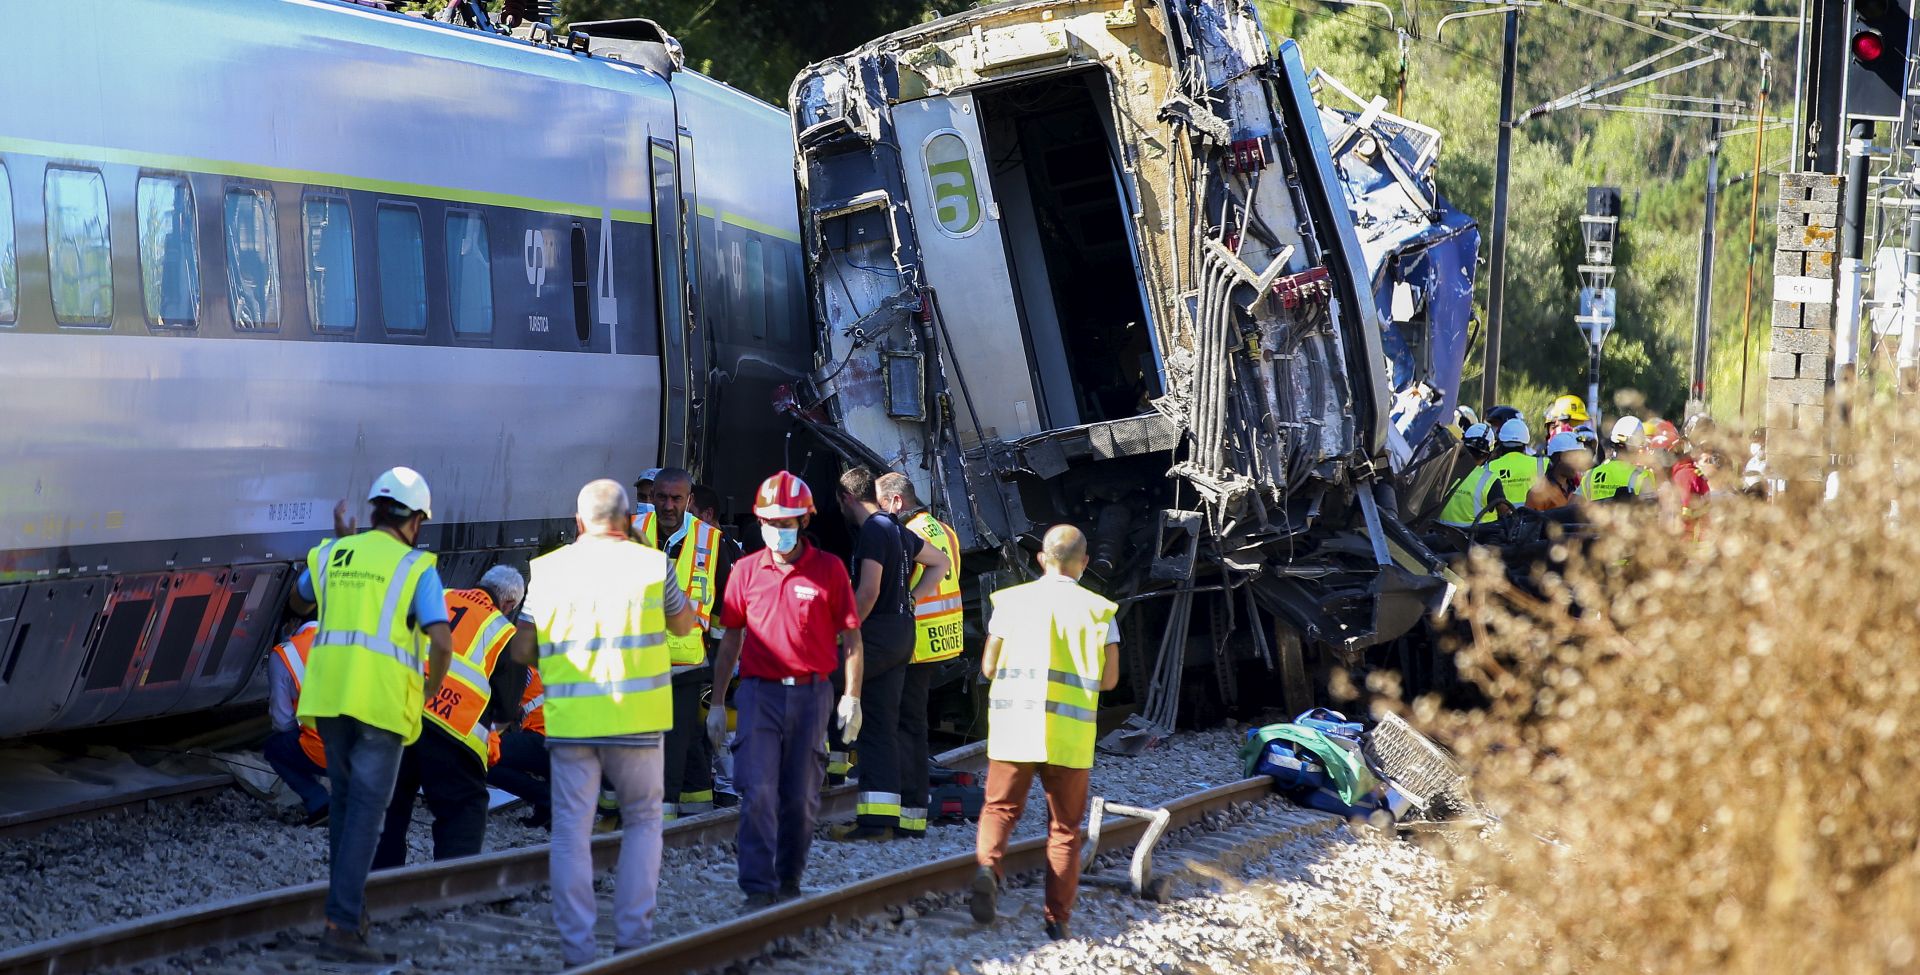 epa08577597 Rescue services at a site of a train crash in Soure, Coimbra, center of Portugal, 31 July 2020. According to reports 72 vehicles with 181 operational and and two planes are being mobilized for the crash site after a train derailed after a collision with maintenance machine leaving at least one person dead and about 50 other passengers injured.  EPA/PAULO CUNHA